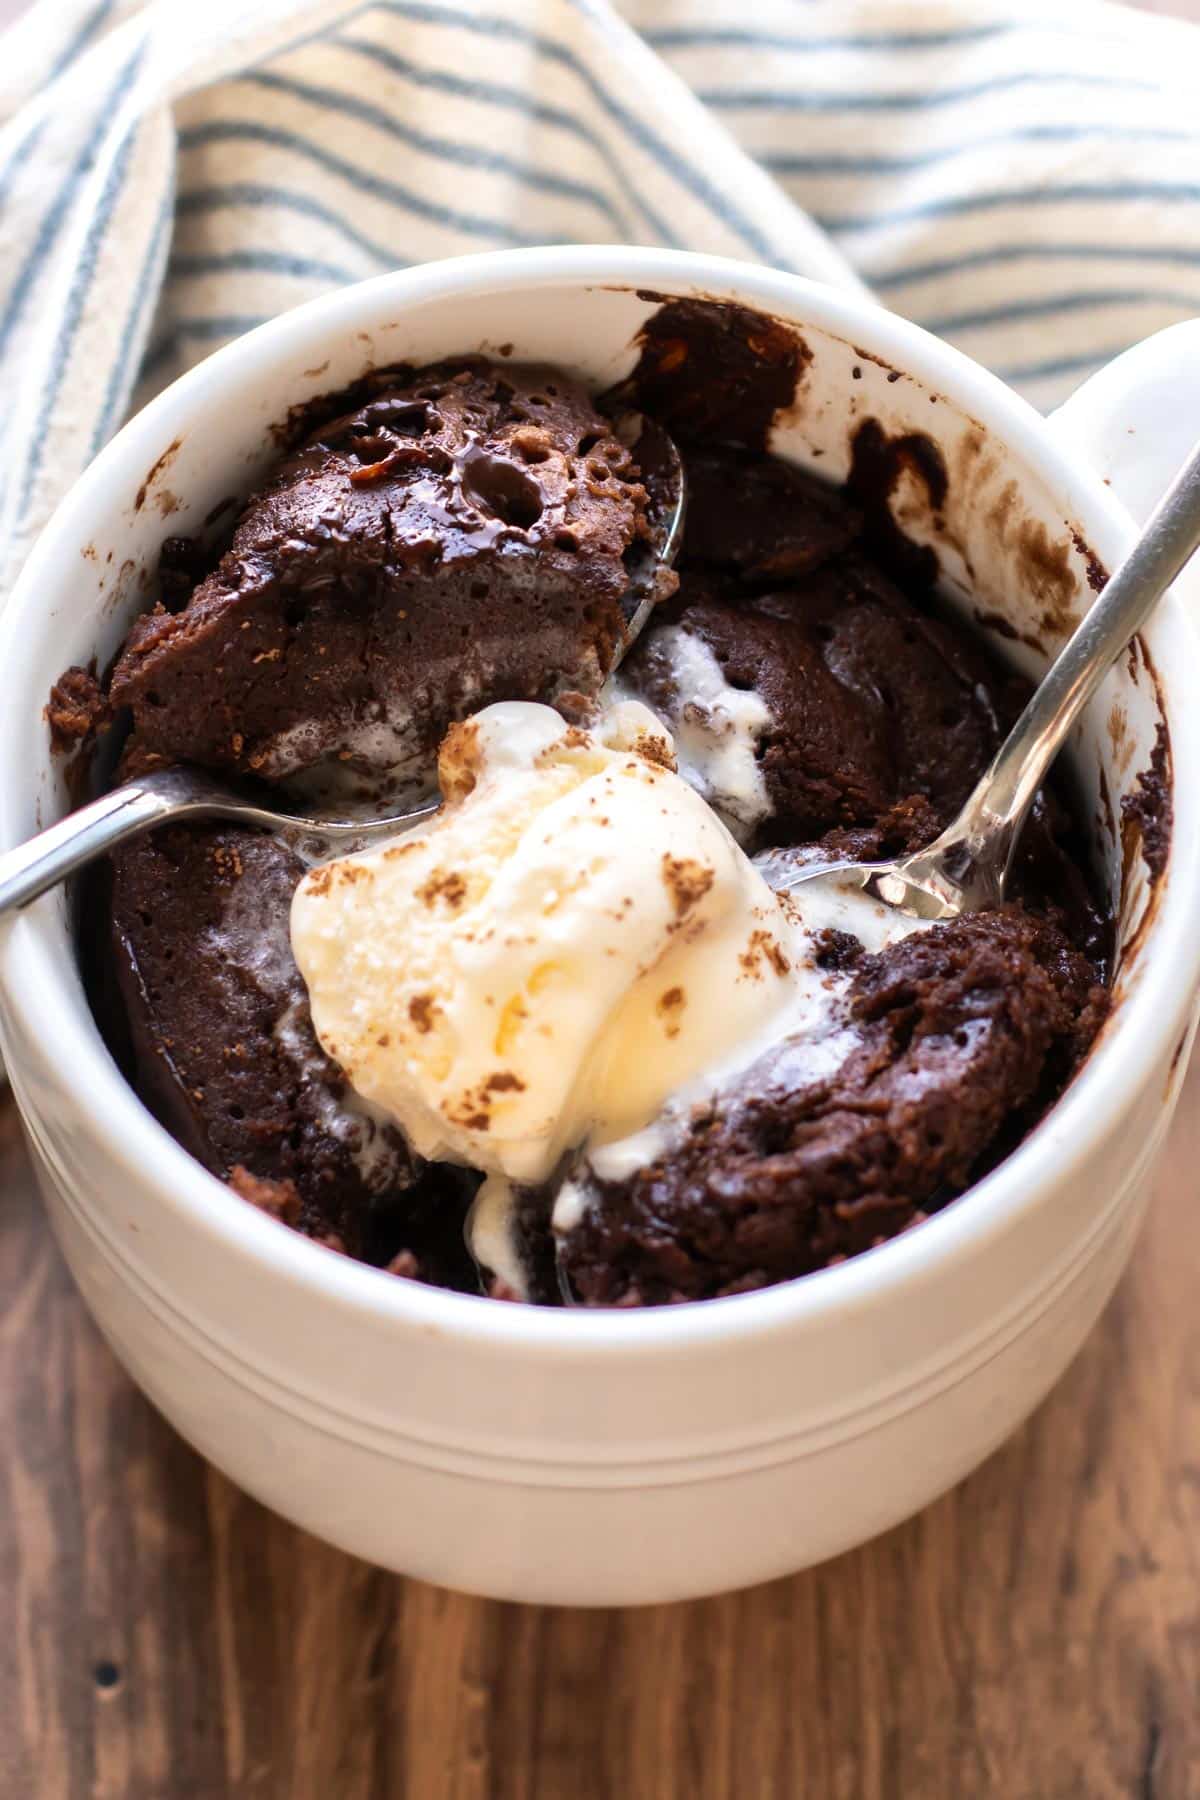 This Chocolate Mug Cake is a 5-minute dessert that's rich, chocolaty, and perfect with a scoop of vanilla ice cream on top. It's the best treat when you're craving something sweet.